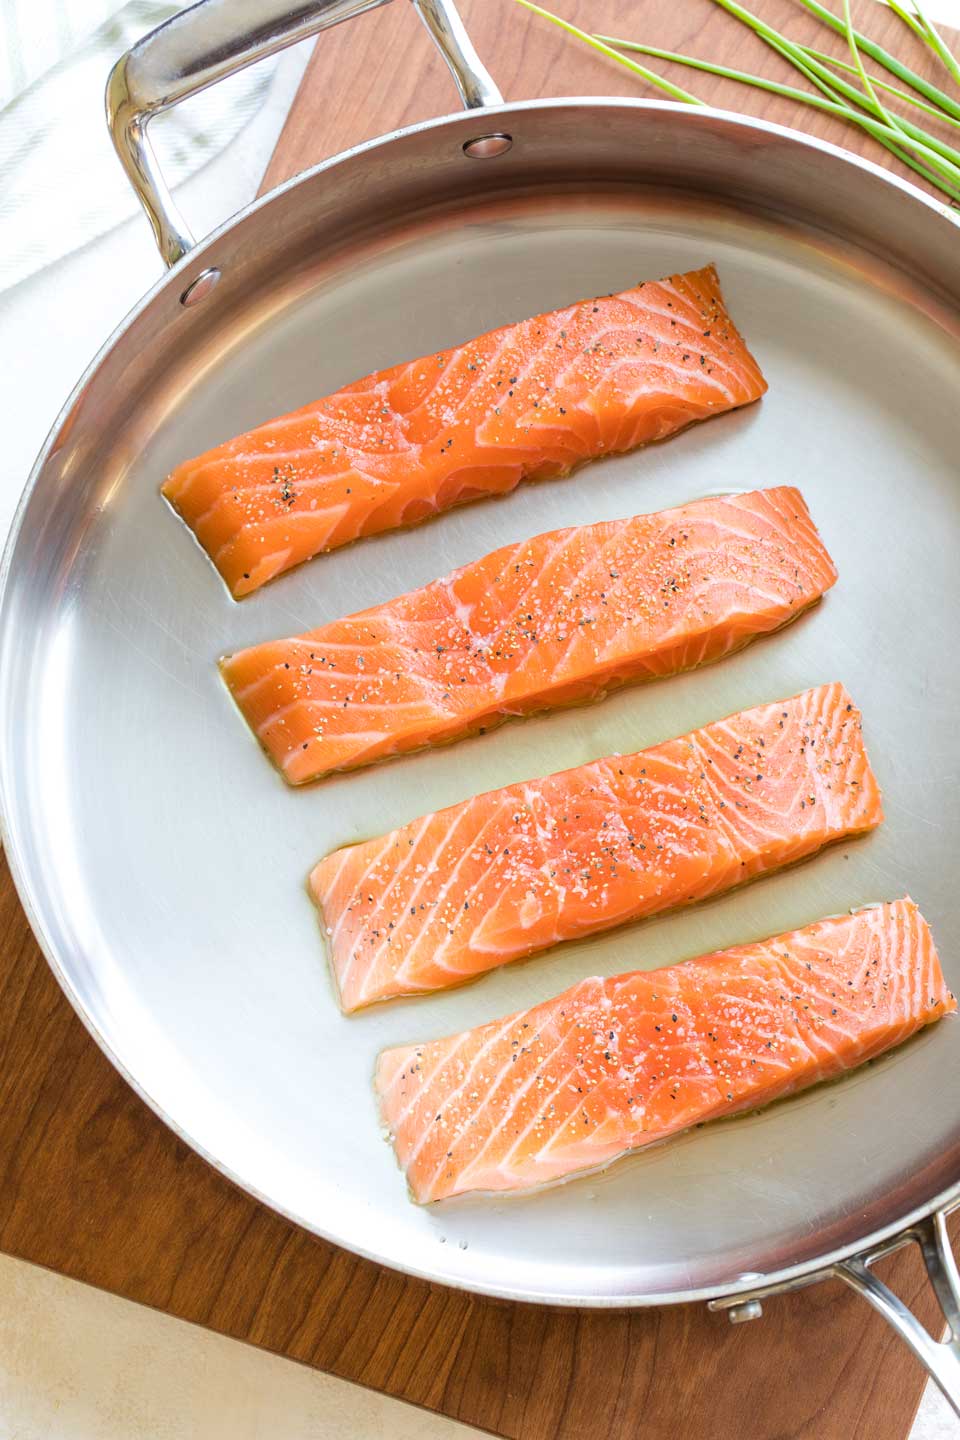 Overhead of four salmon fillets, uncooked but ready to be seared in a metal pan.